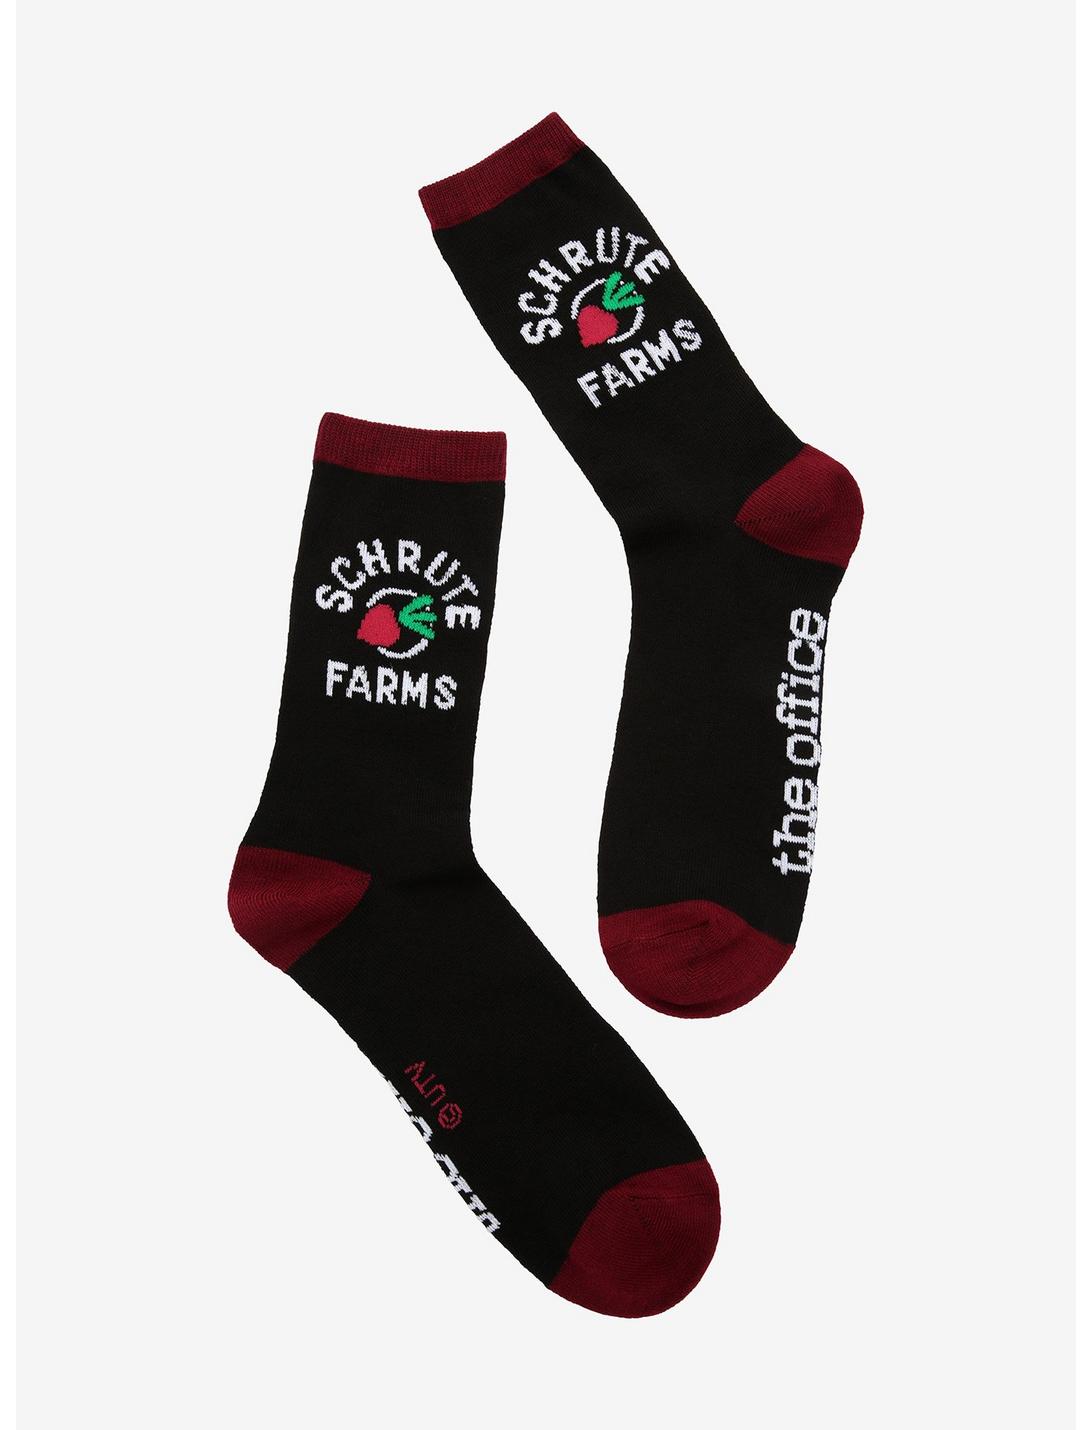 The Office Schrute Farms Crew Socks, , hi-res